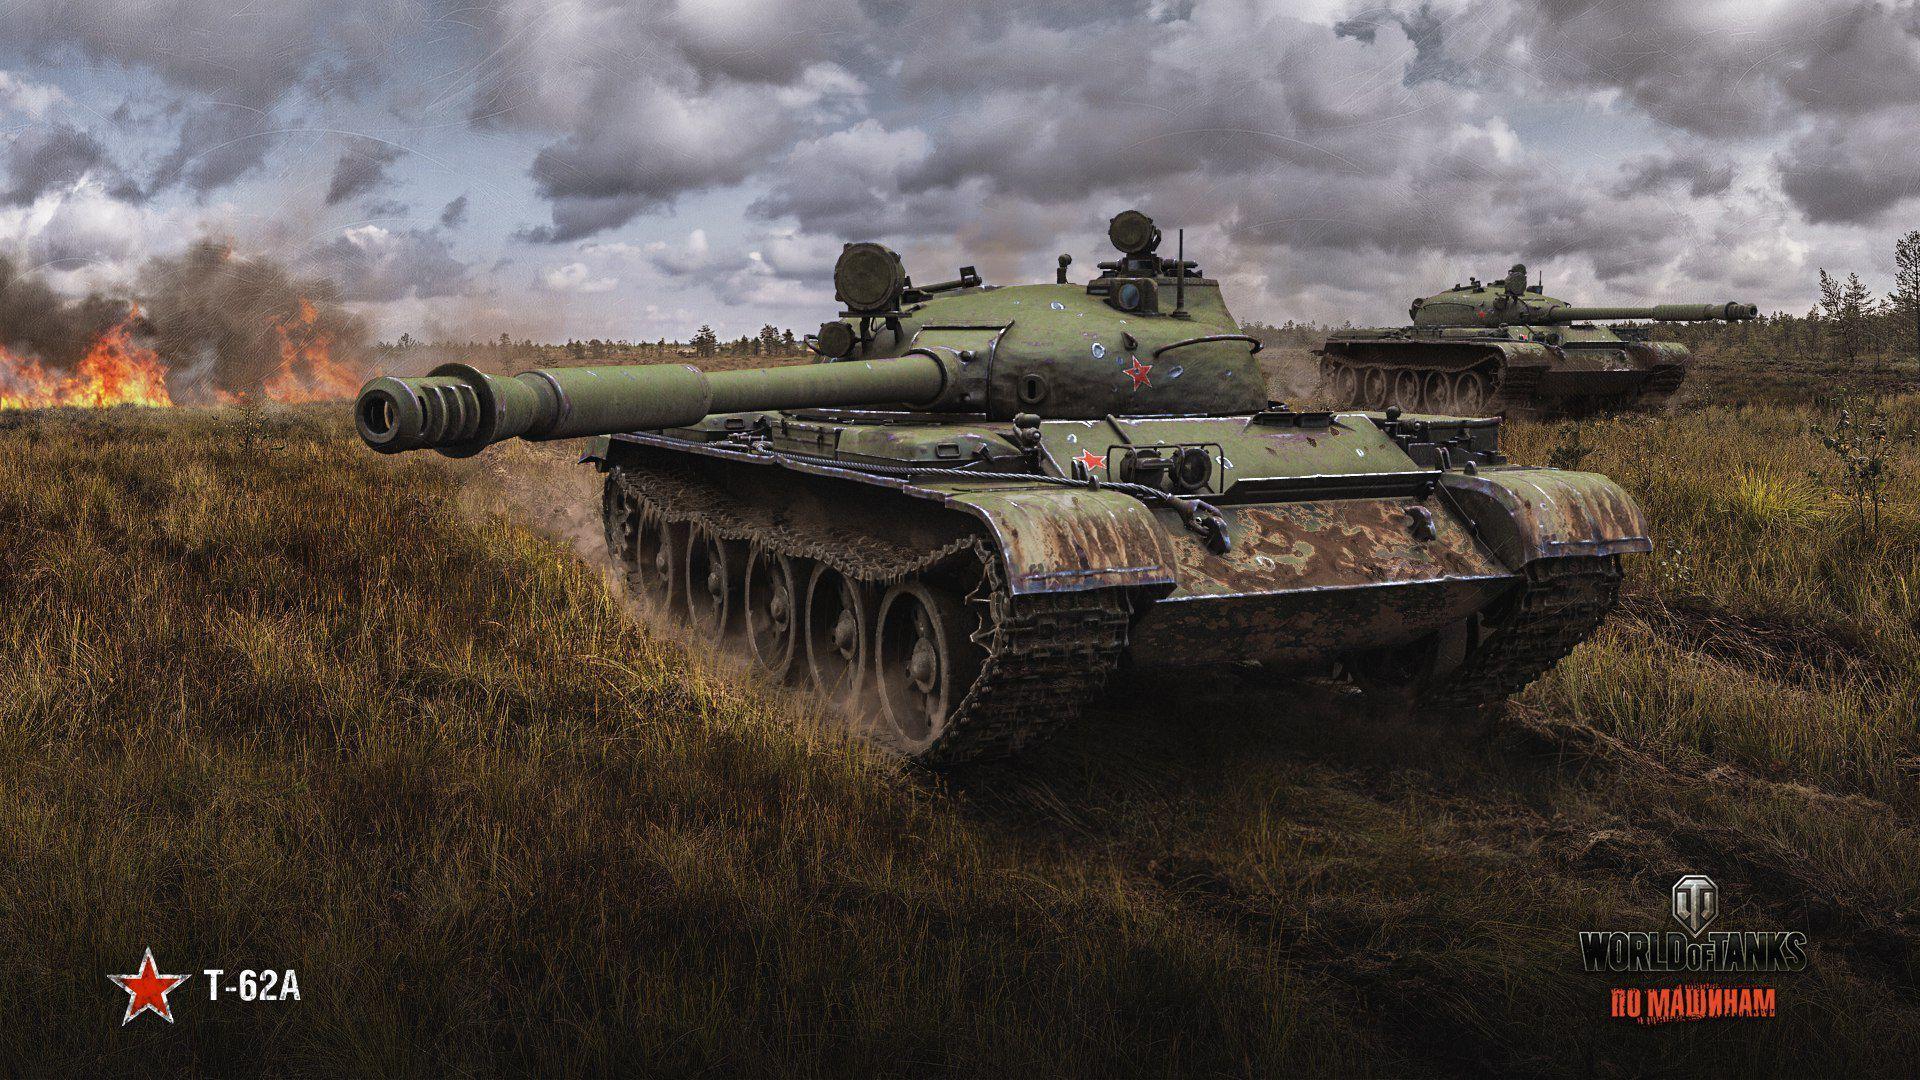 World Of Tanks Wallpaper 1920x1080 85 images